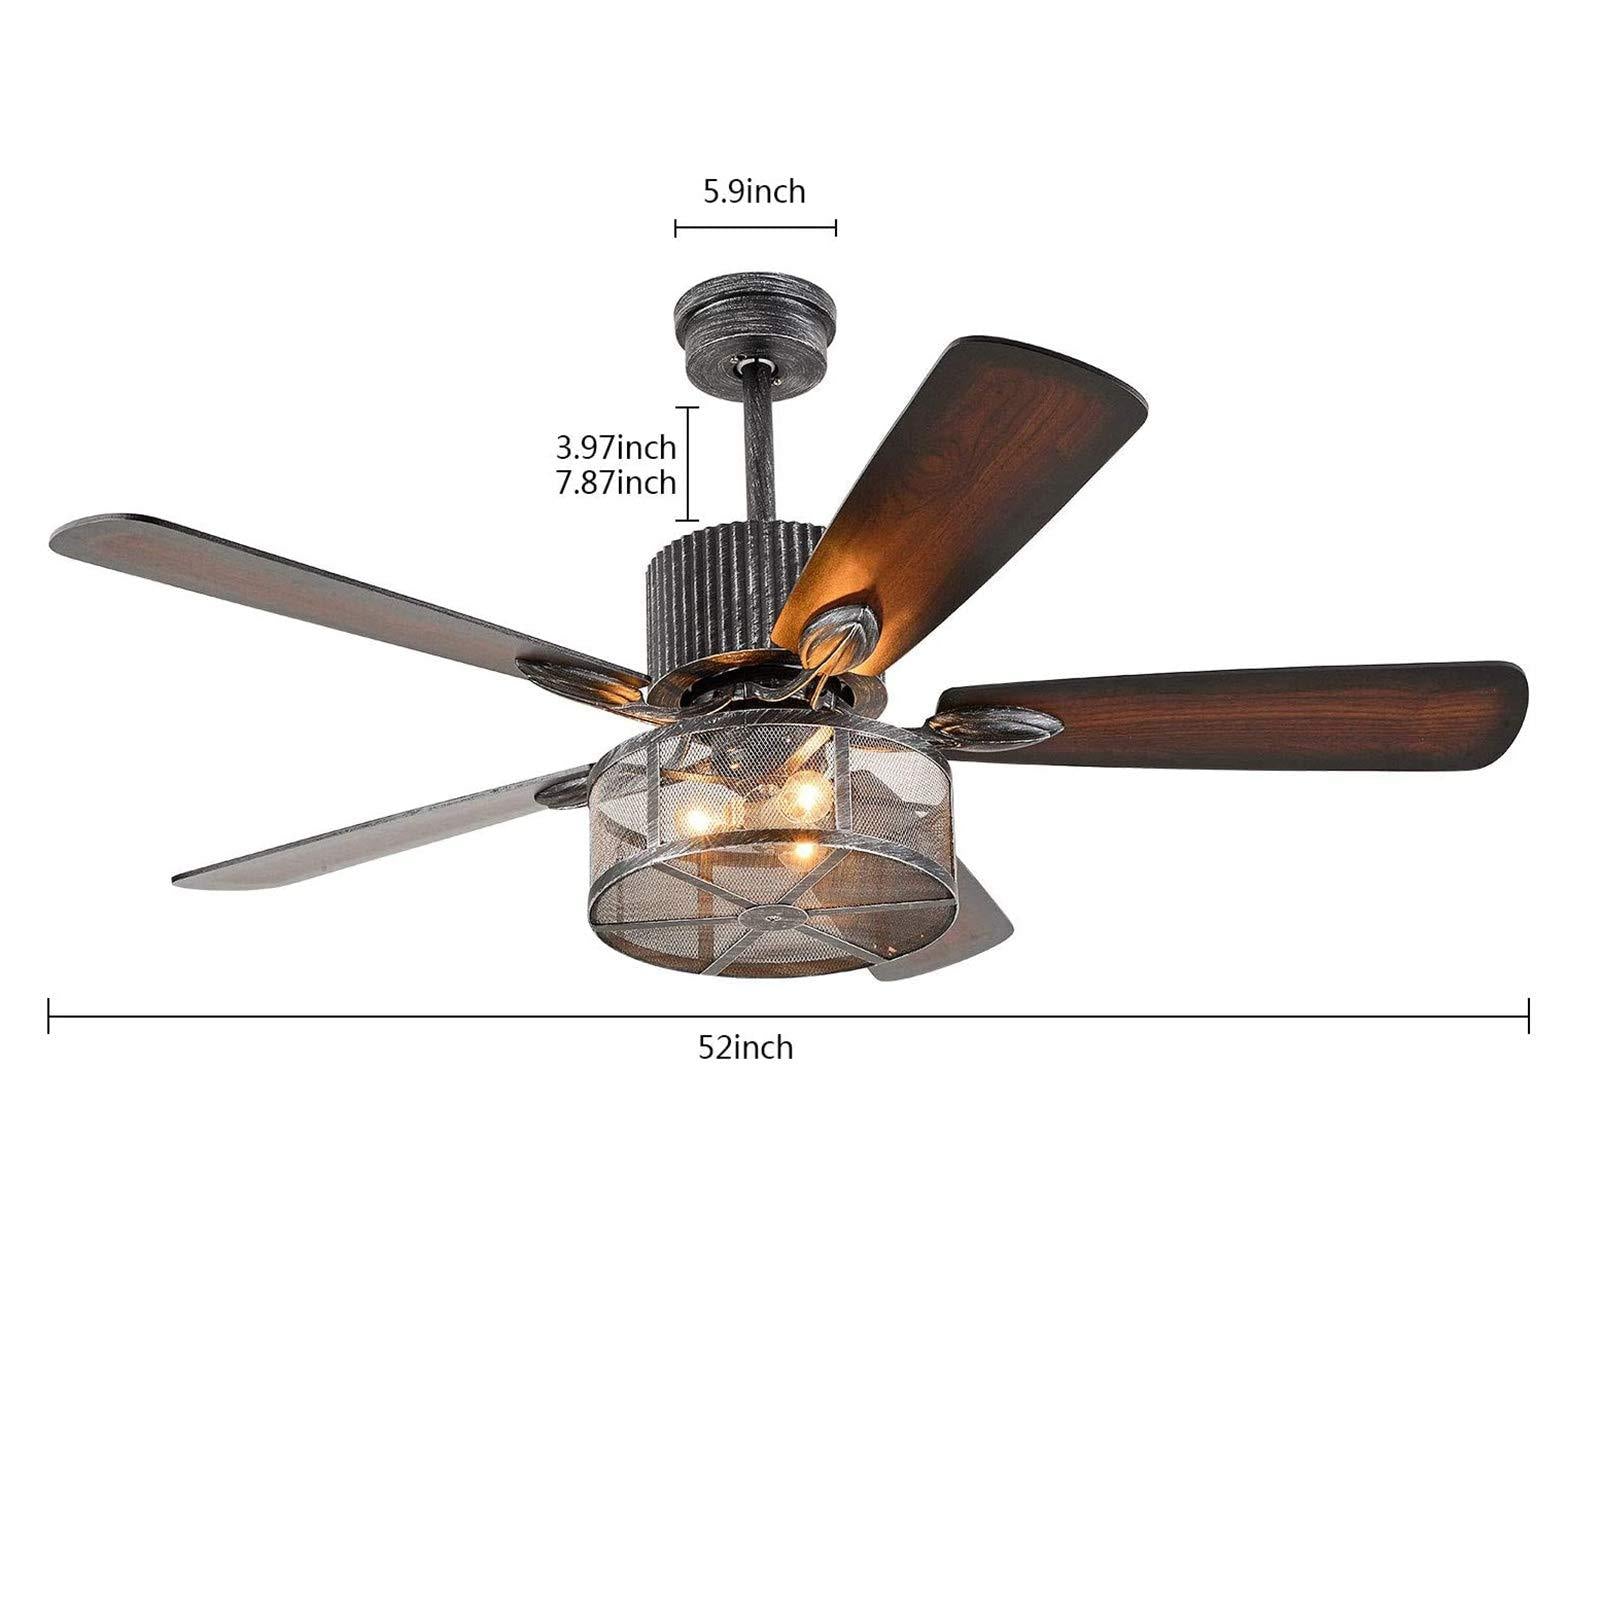 Ceiling Fan with Light 3 Speed with Remote Control